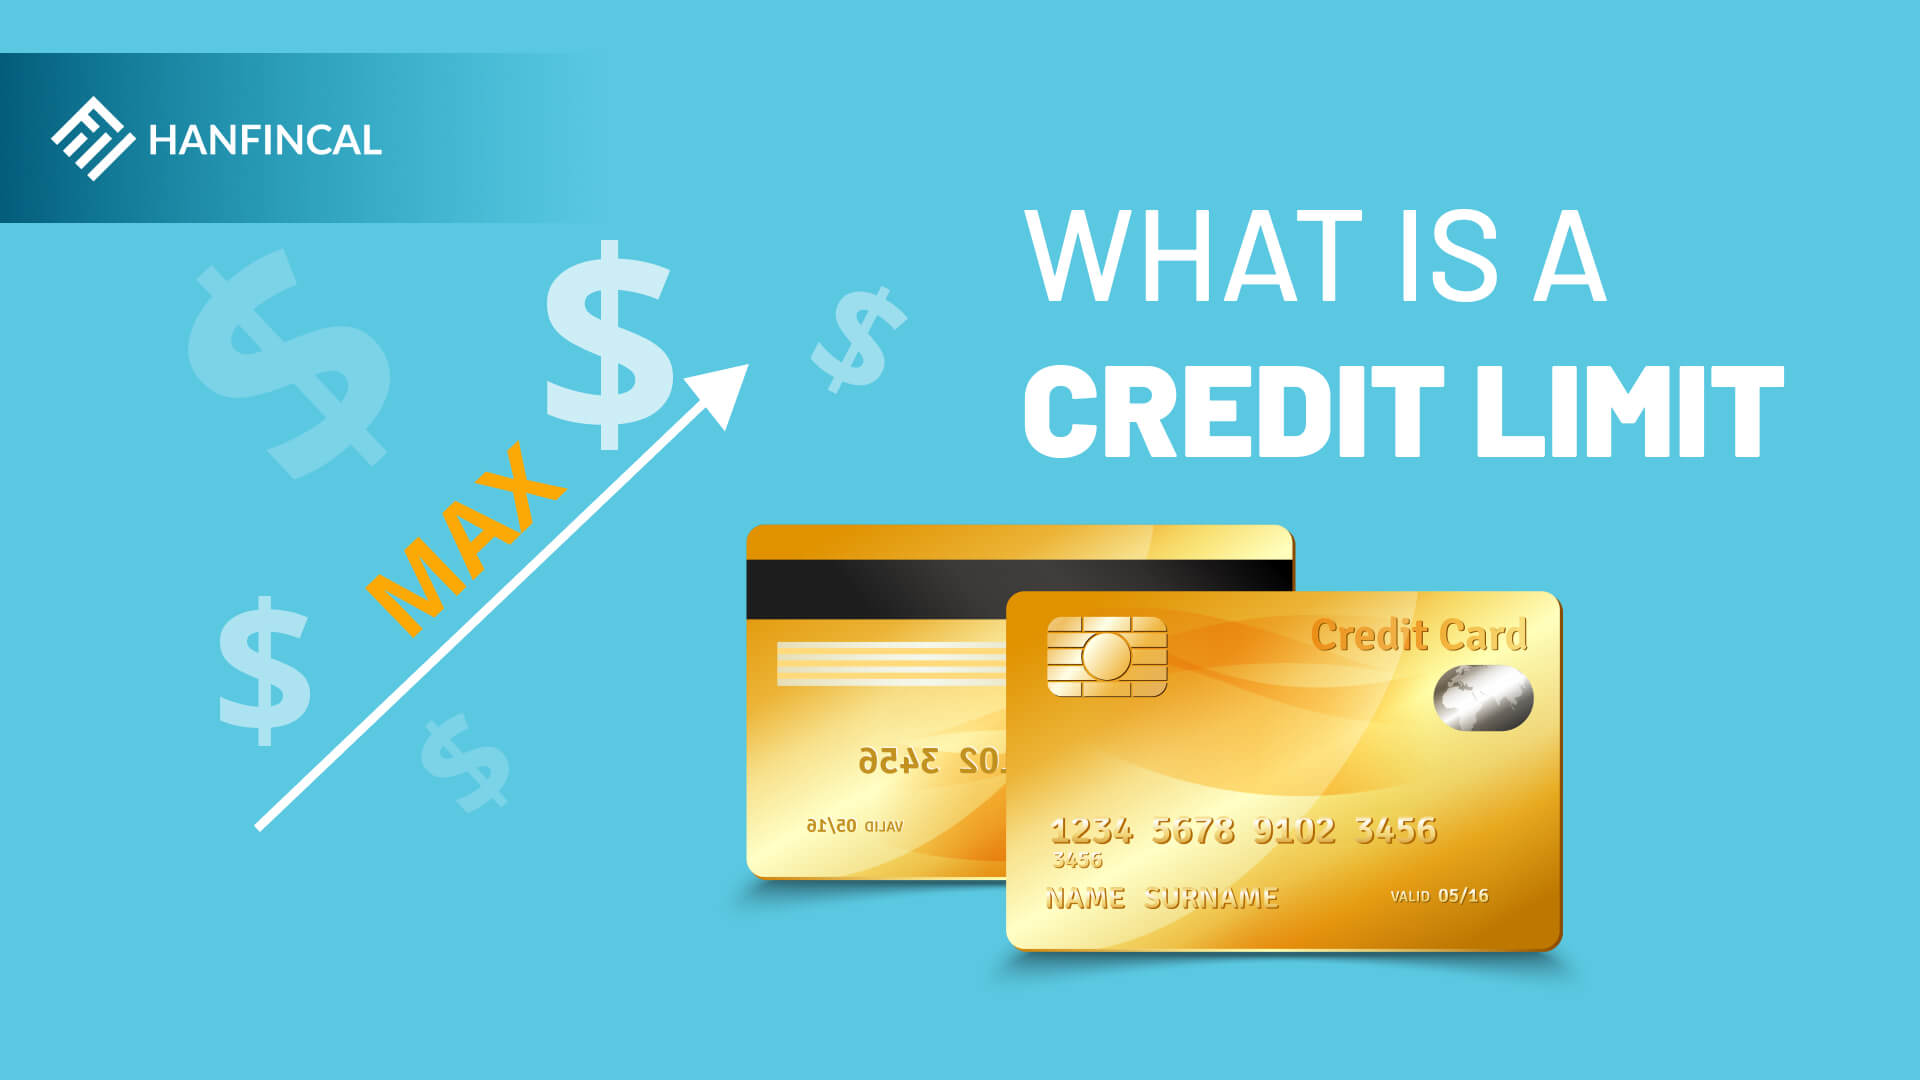 What is a credit limit?